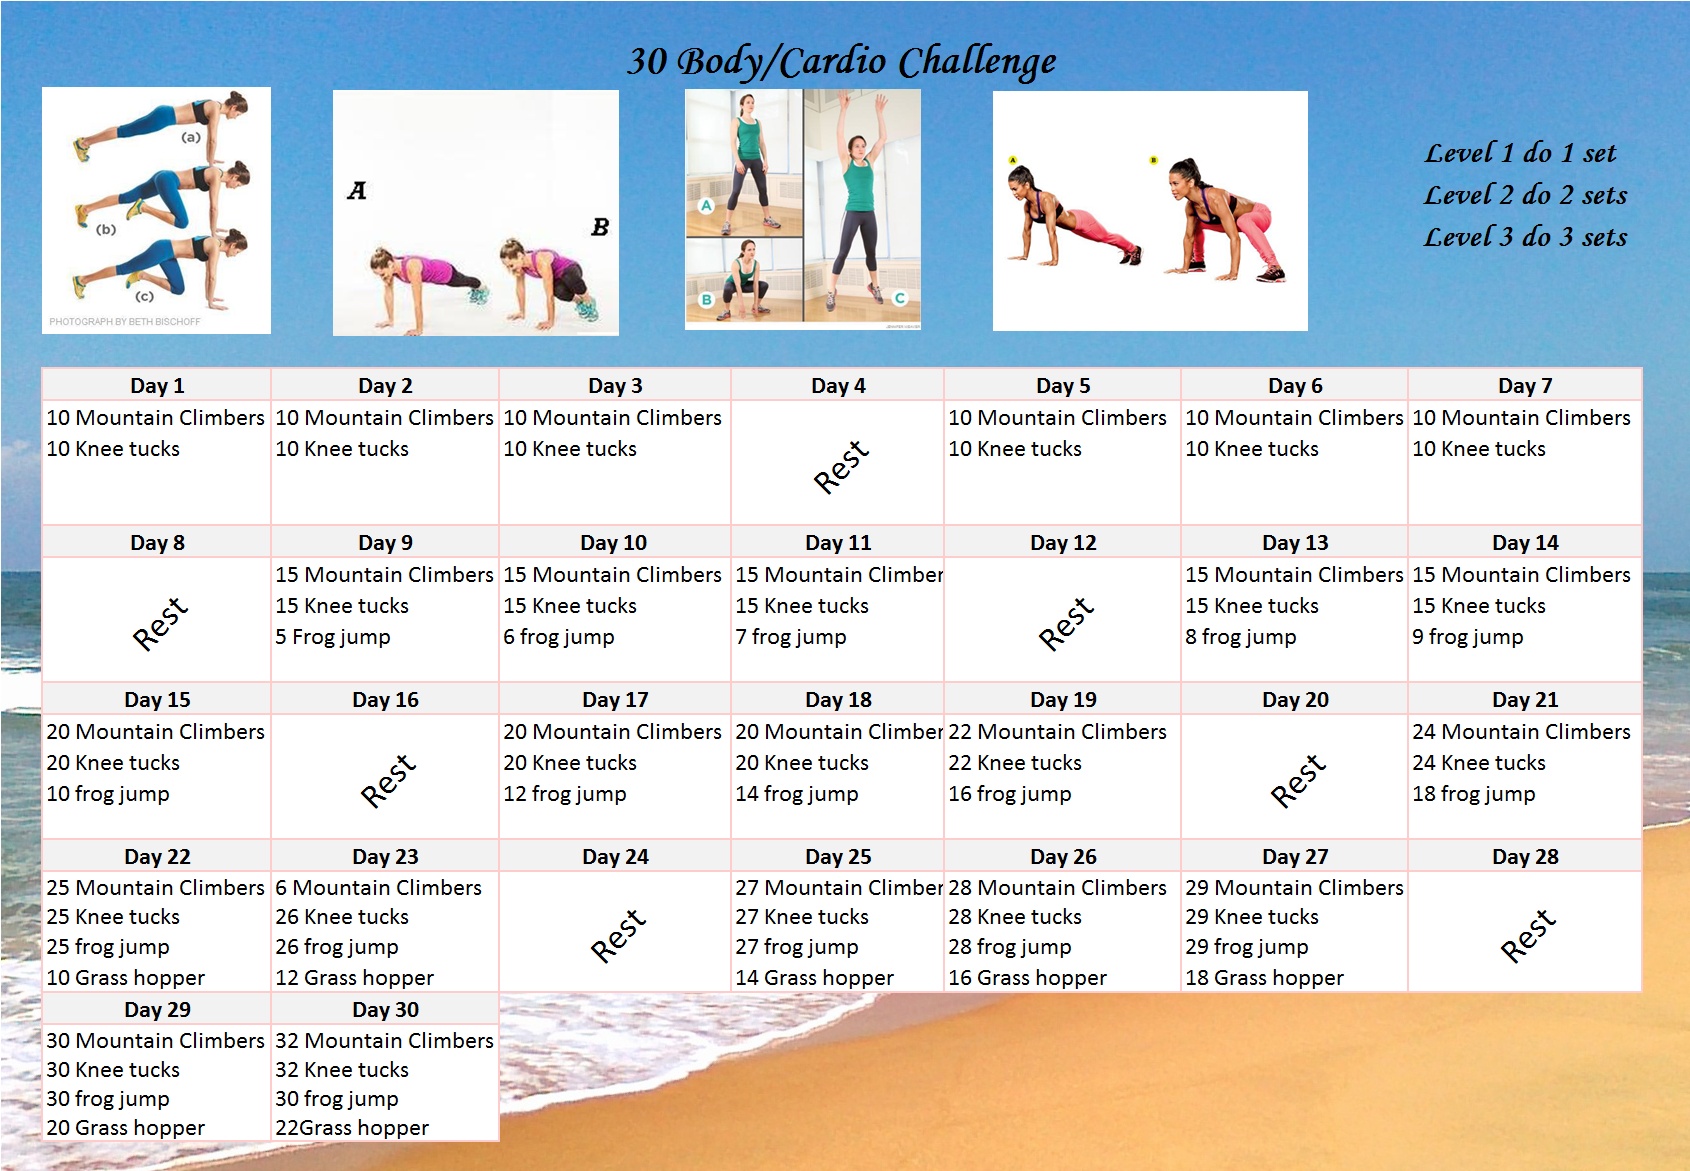 2018 - 30 Day Fitness Challenge